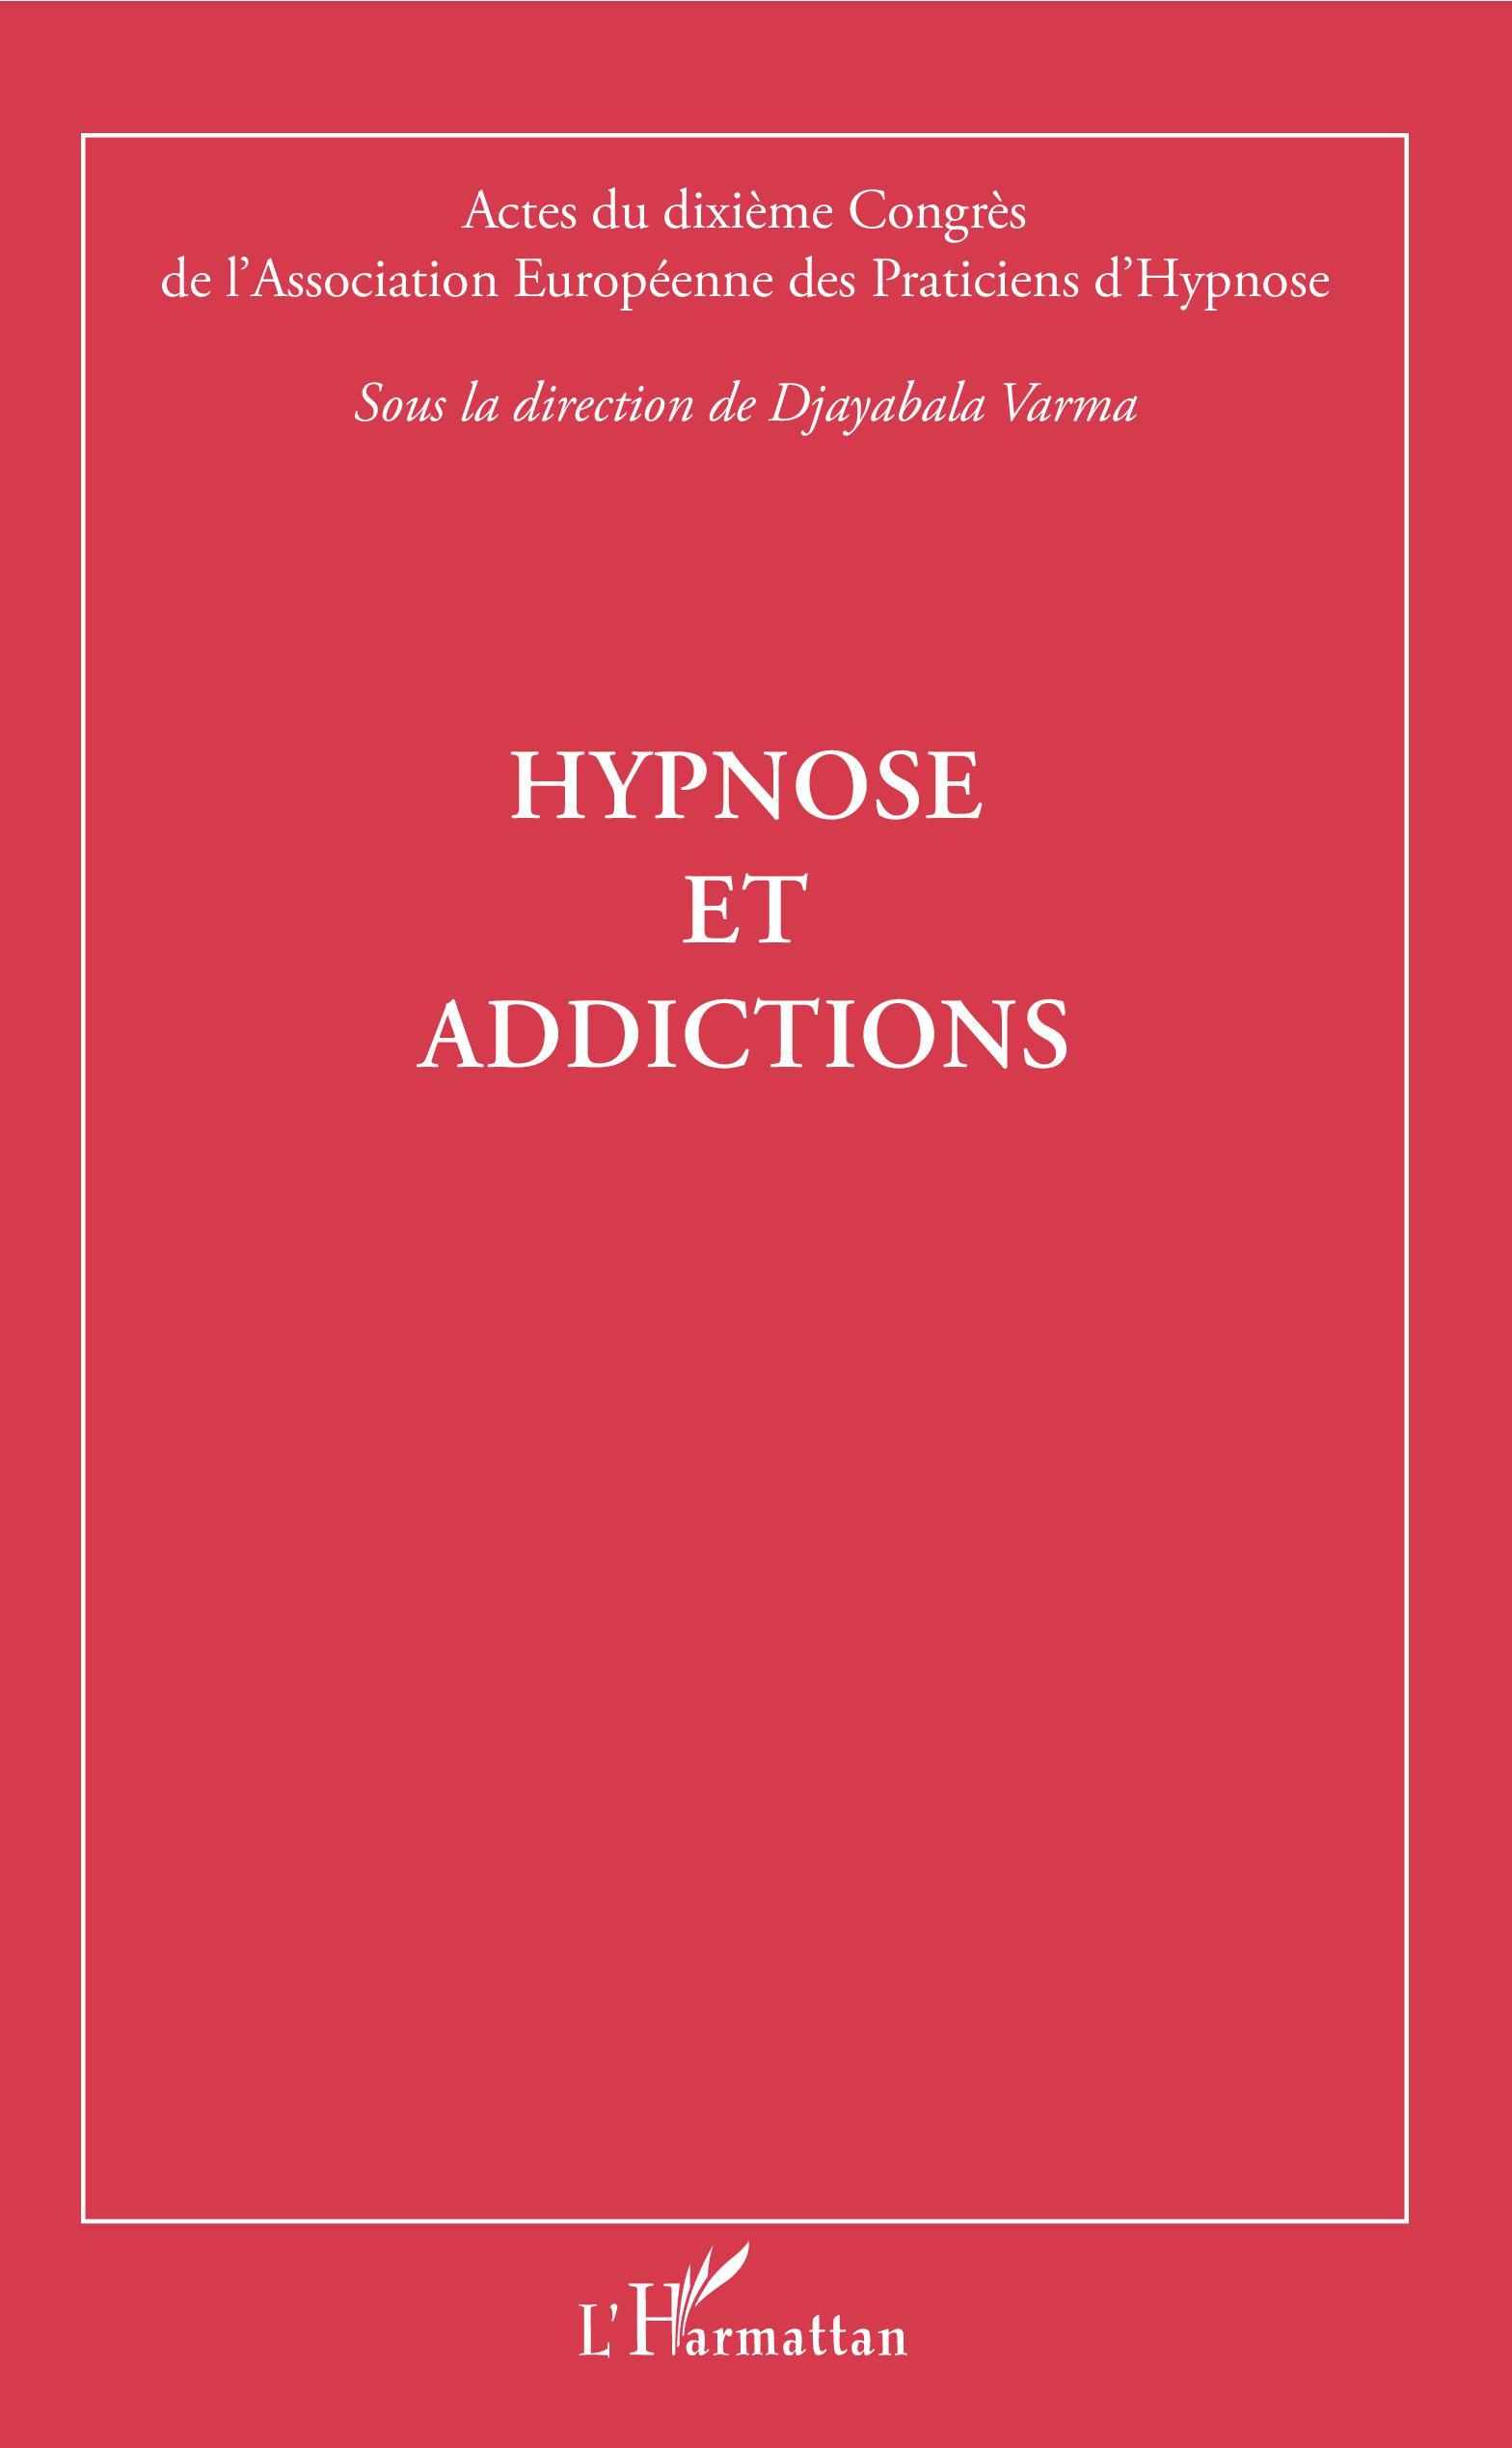 Hypnose et addictions (9782343161303-front-cover)